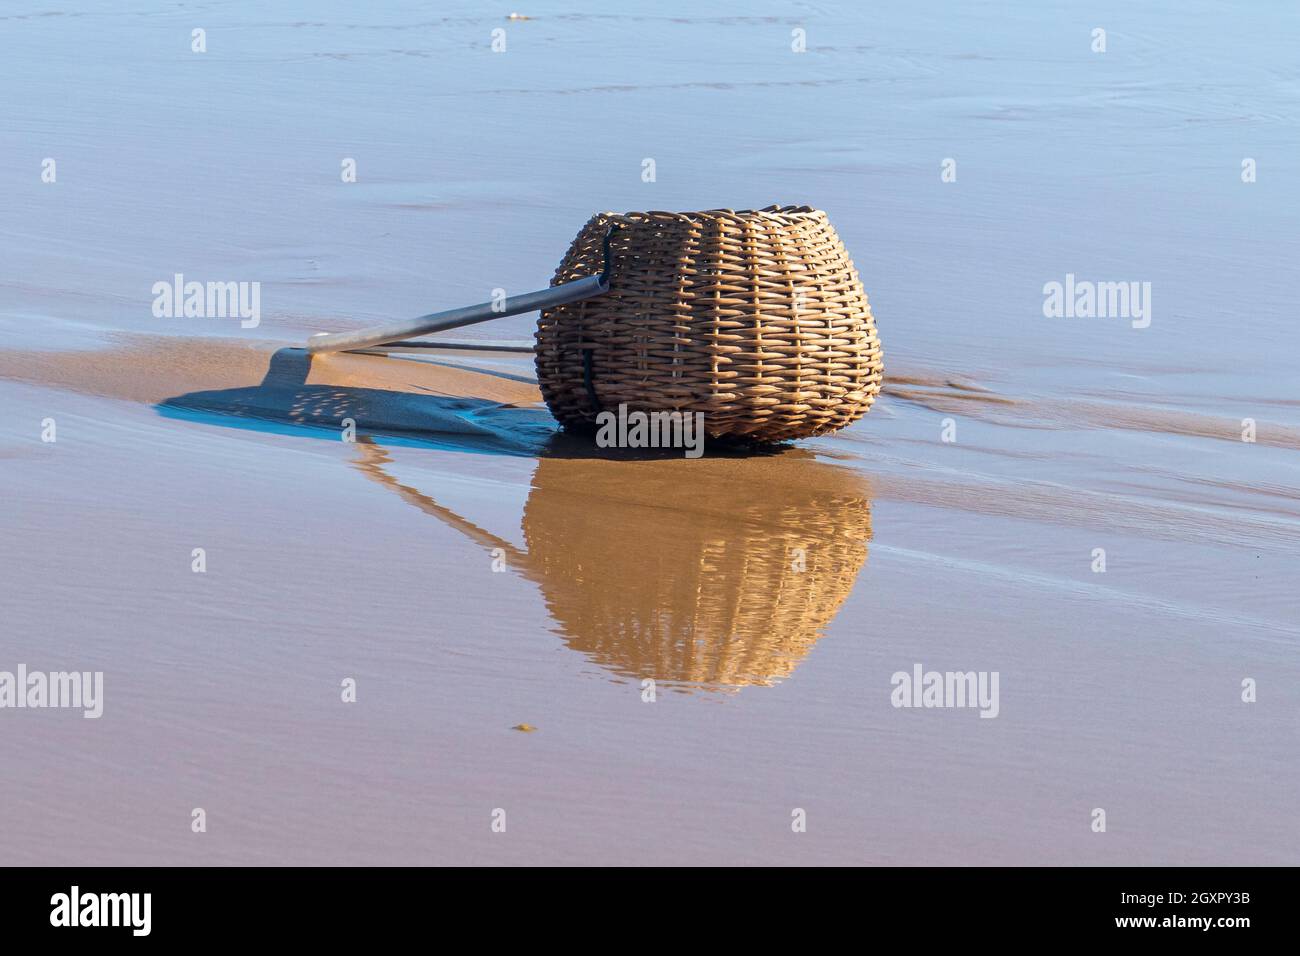 https://c8.alamy.com/comp/2GXPY3B/reflections-of-vintage-fishing-creel-on-water-in-marau-state-of-bahia-brazil-2GXPY3B.jpg